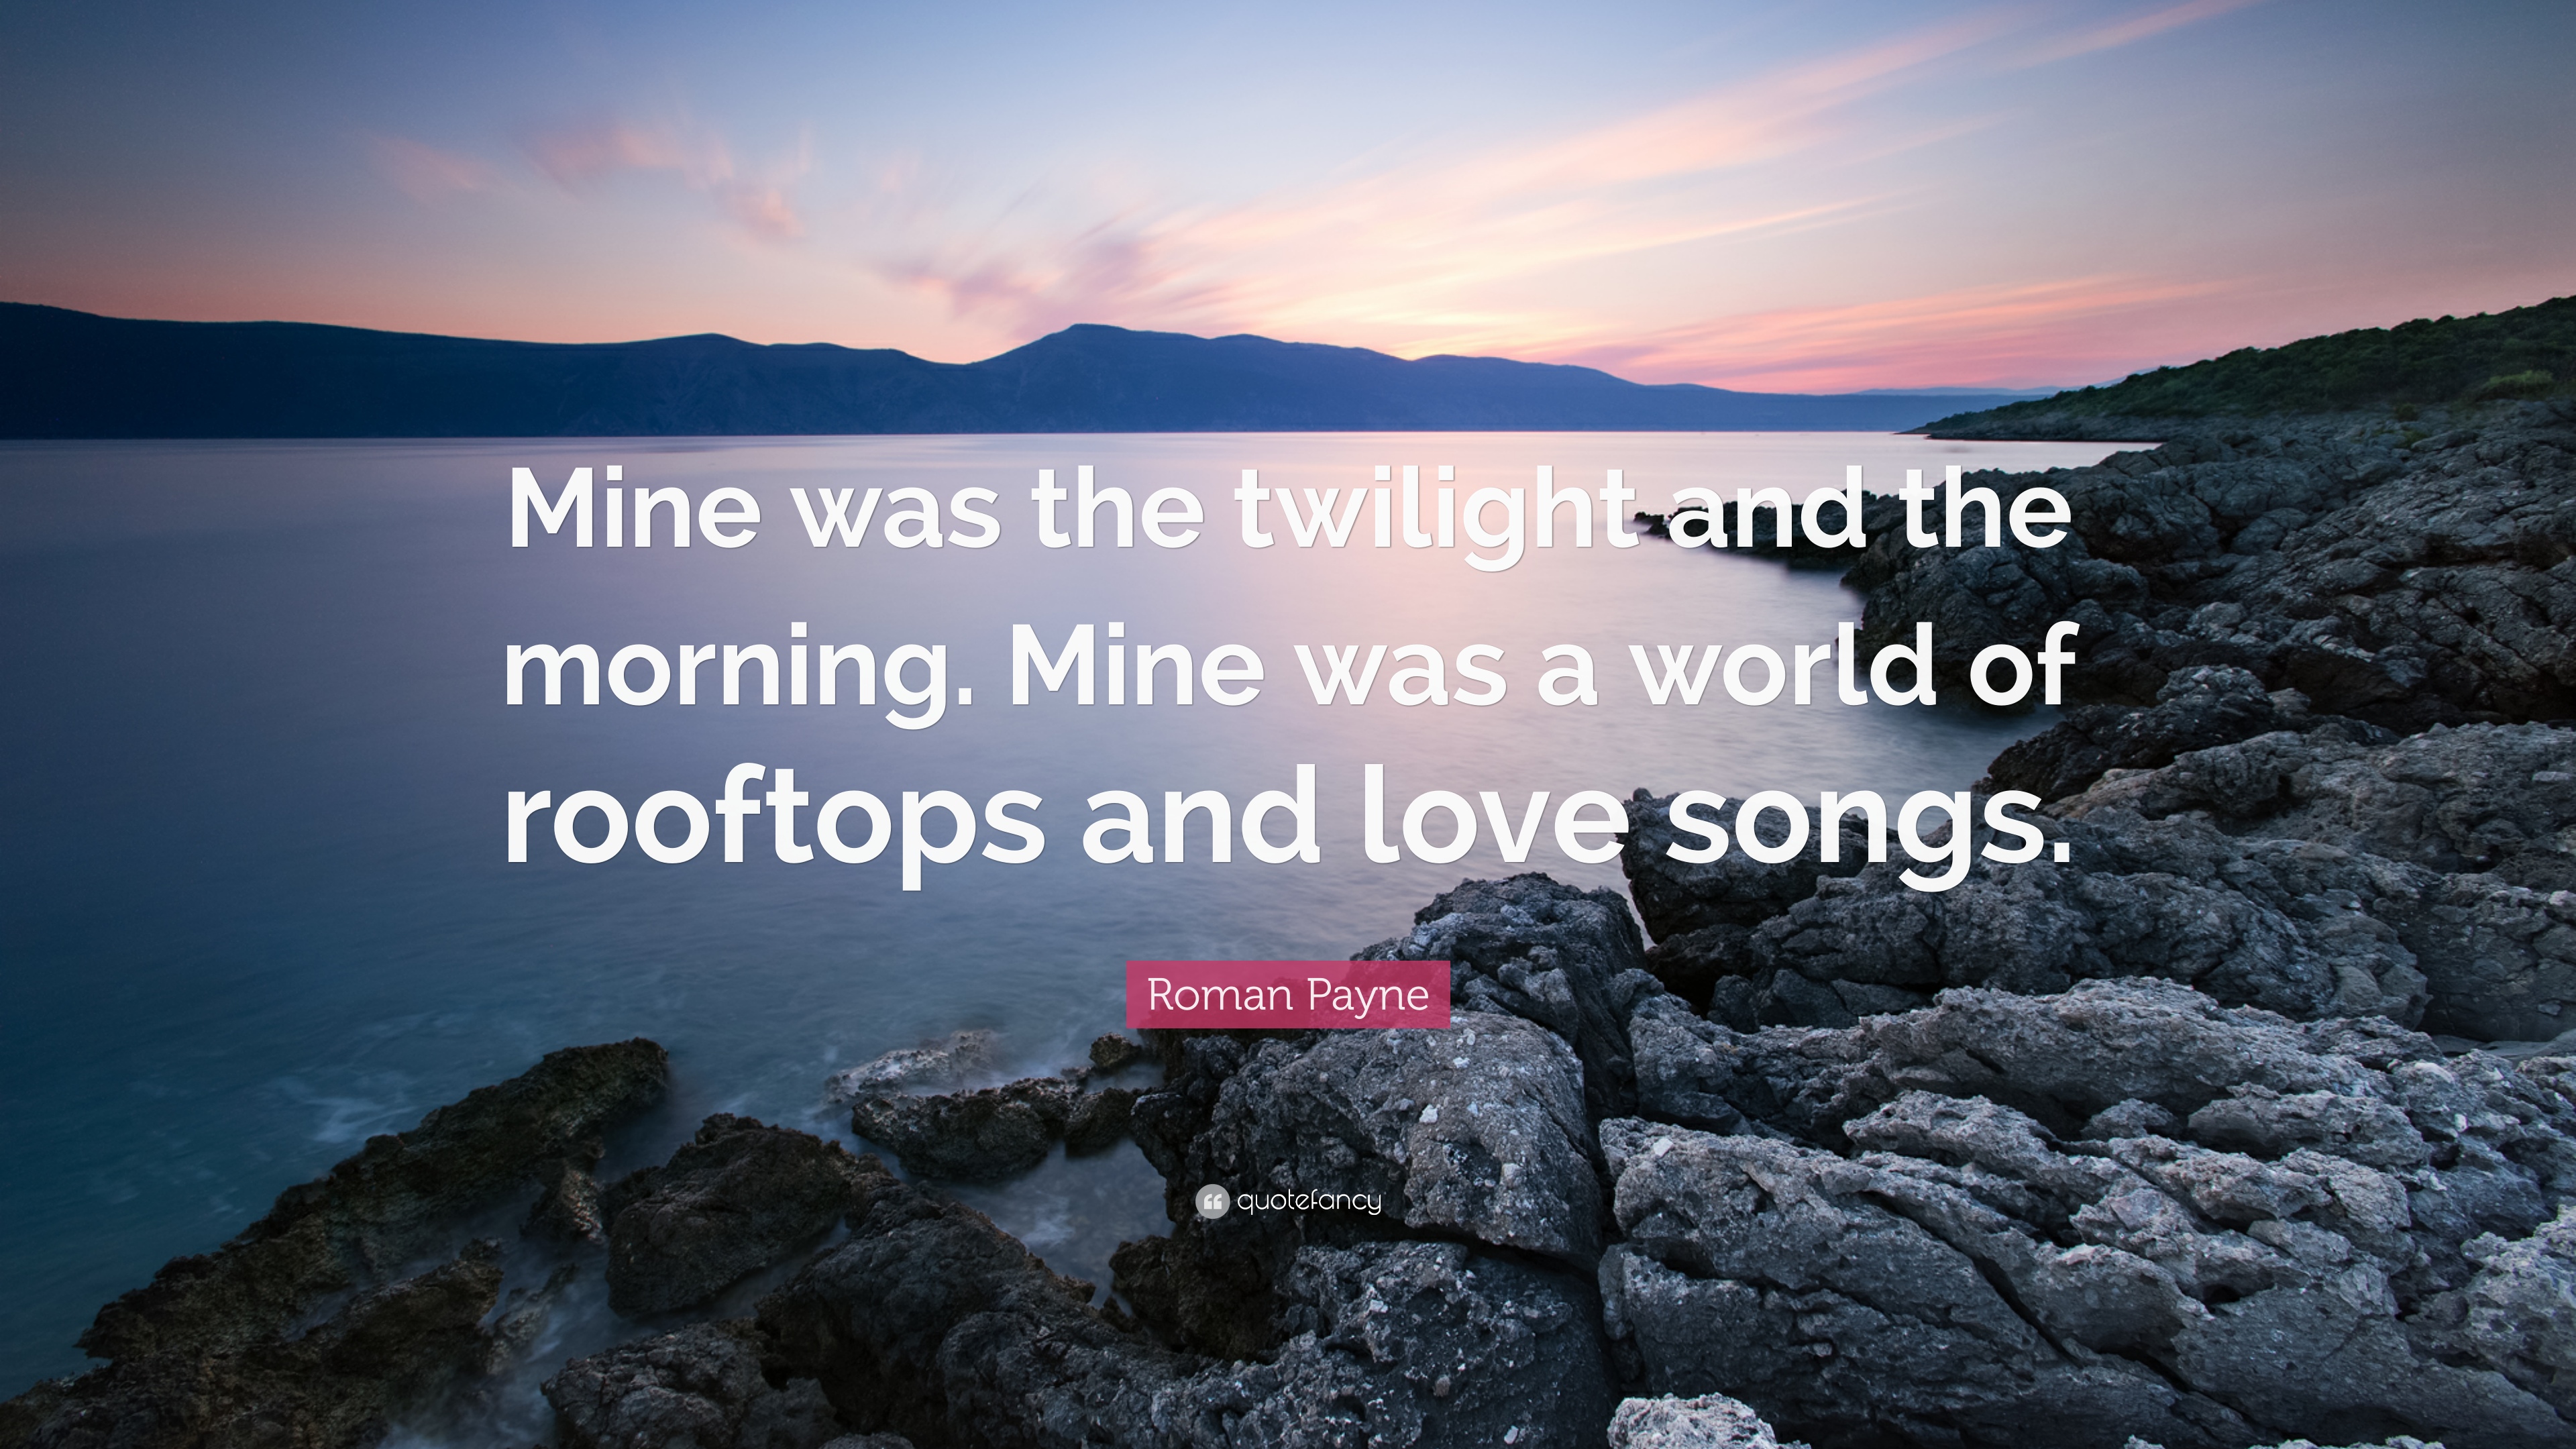 Roman Payne Quote: “Mine was the twilight and the morning